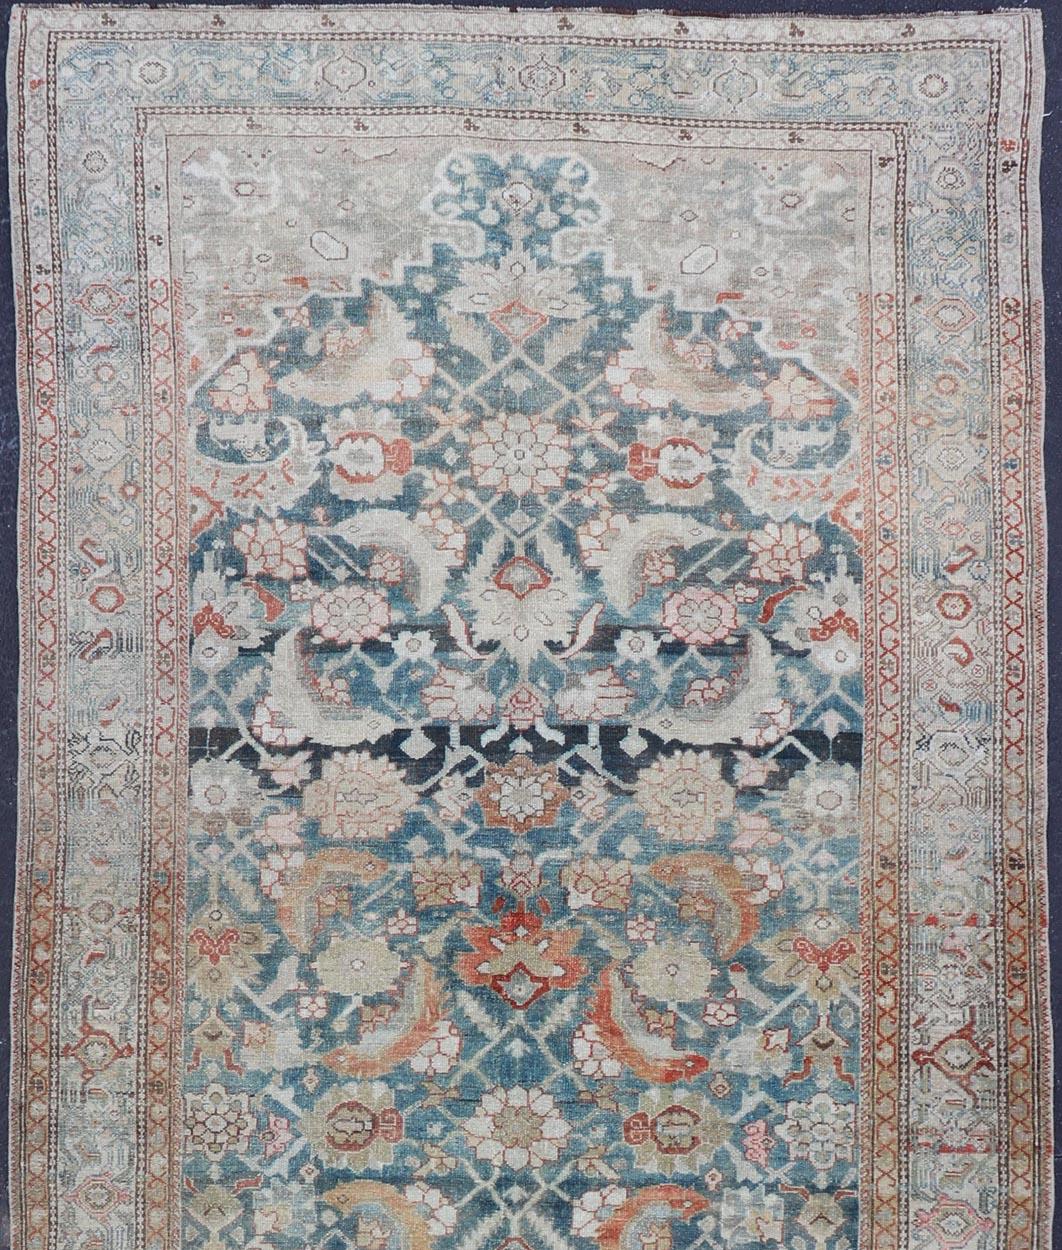 Antique Kurdish runner antique with floral motifs Hand Knotted
rug W22-0205, country of origin / type: Iran / Kurdish, circa 1900.

This Kurdish Gallery Runner from early 20th century Persia is characterized by its all-over design. The piece is